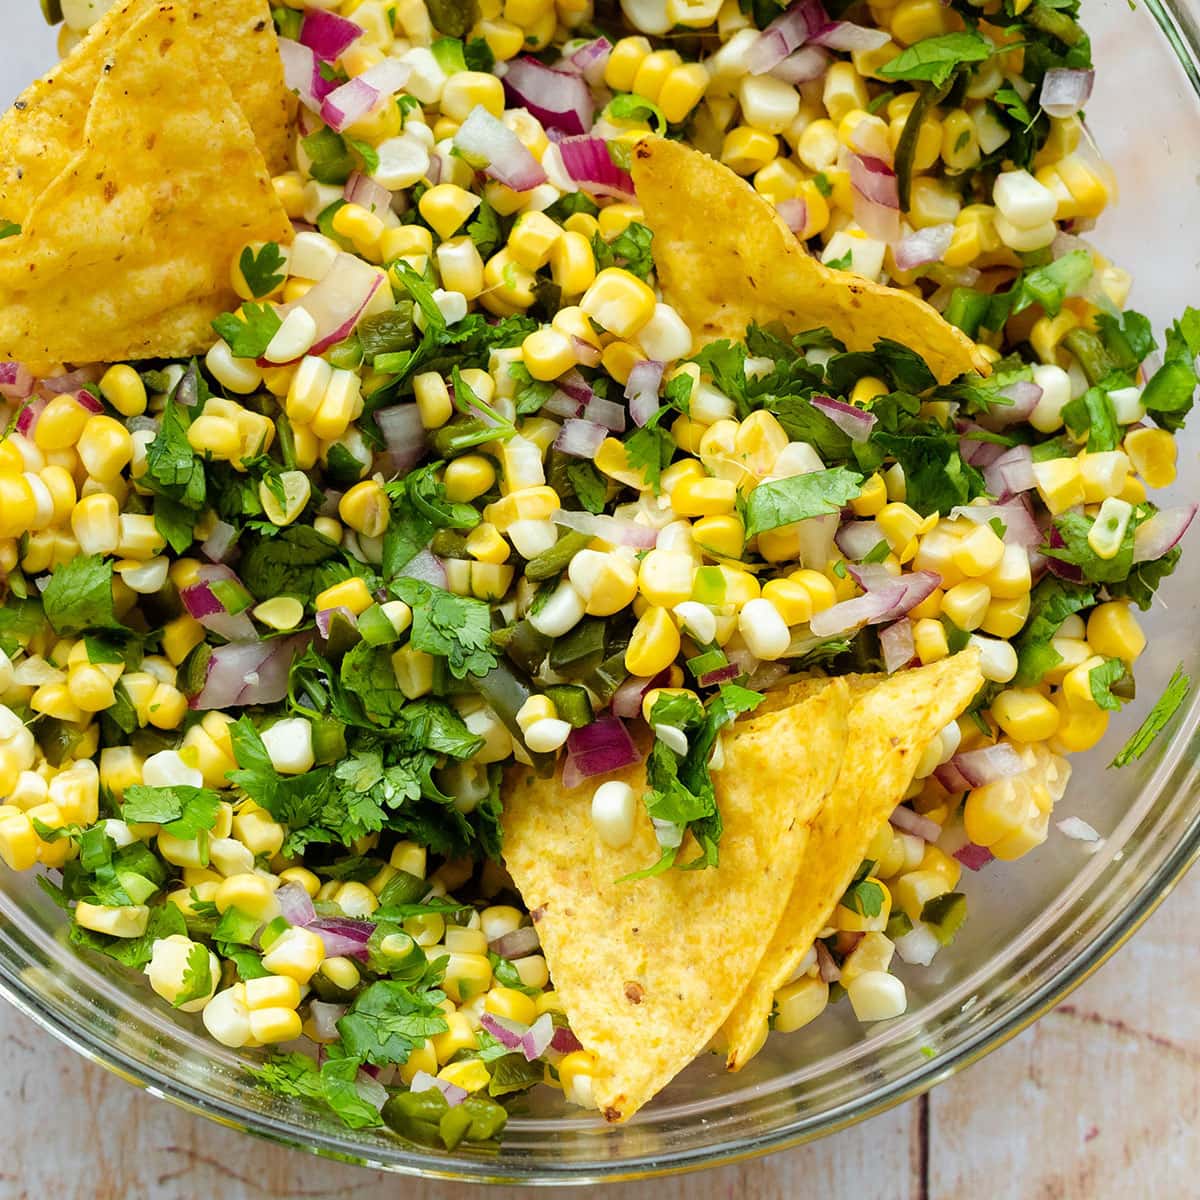 A close up of a glass bowl with Chili Corn salsa on a light wooden backgrond.